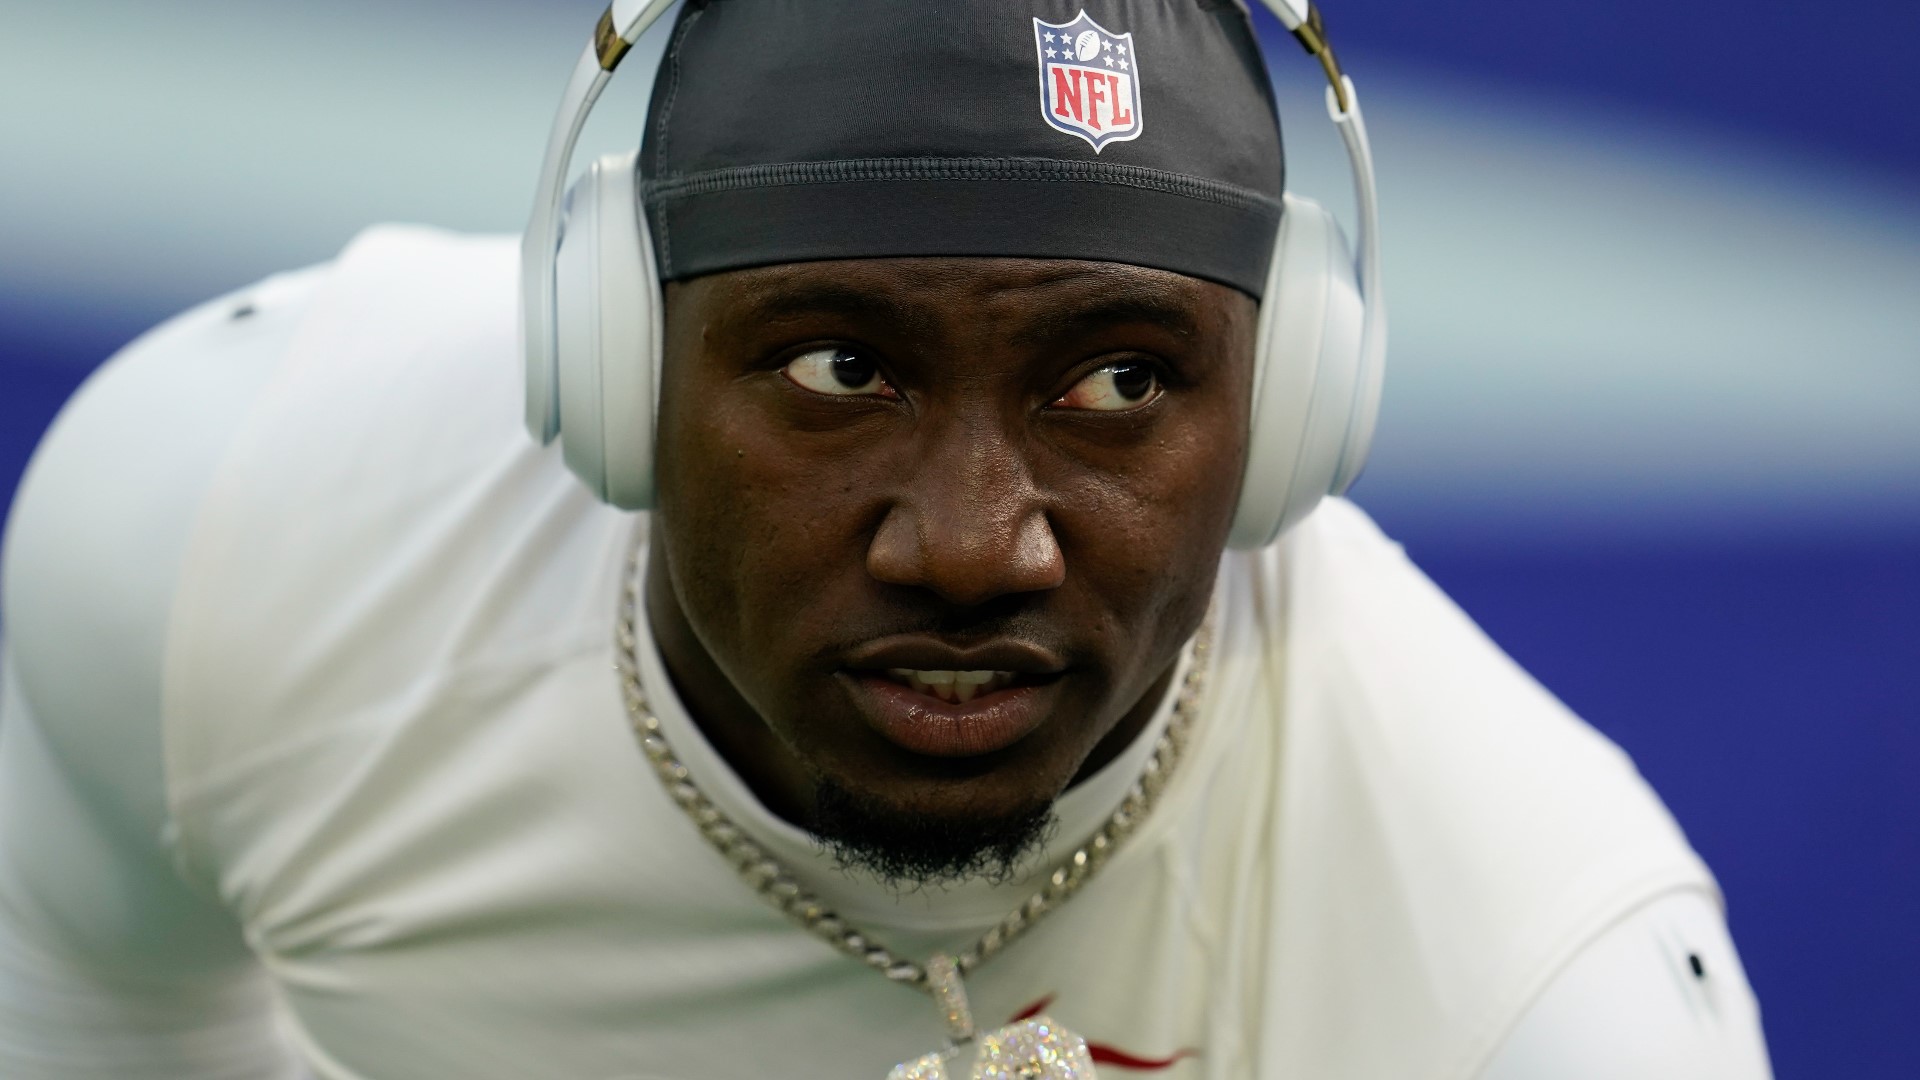 According to multiple reports, Deebo Samuel's extension is a 3 year deal worth up to $73 million, including $58 million in guarantees with the San Francisco 49ers.